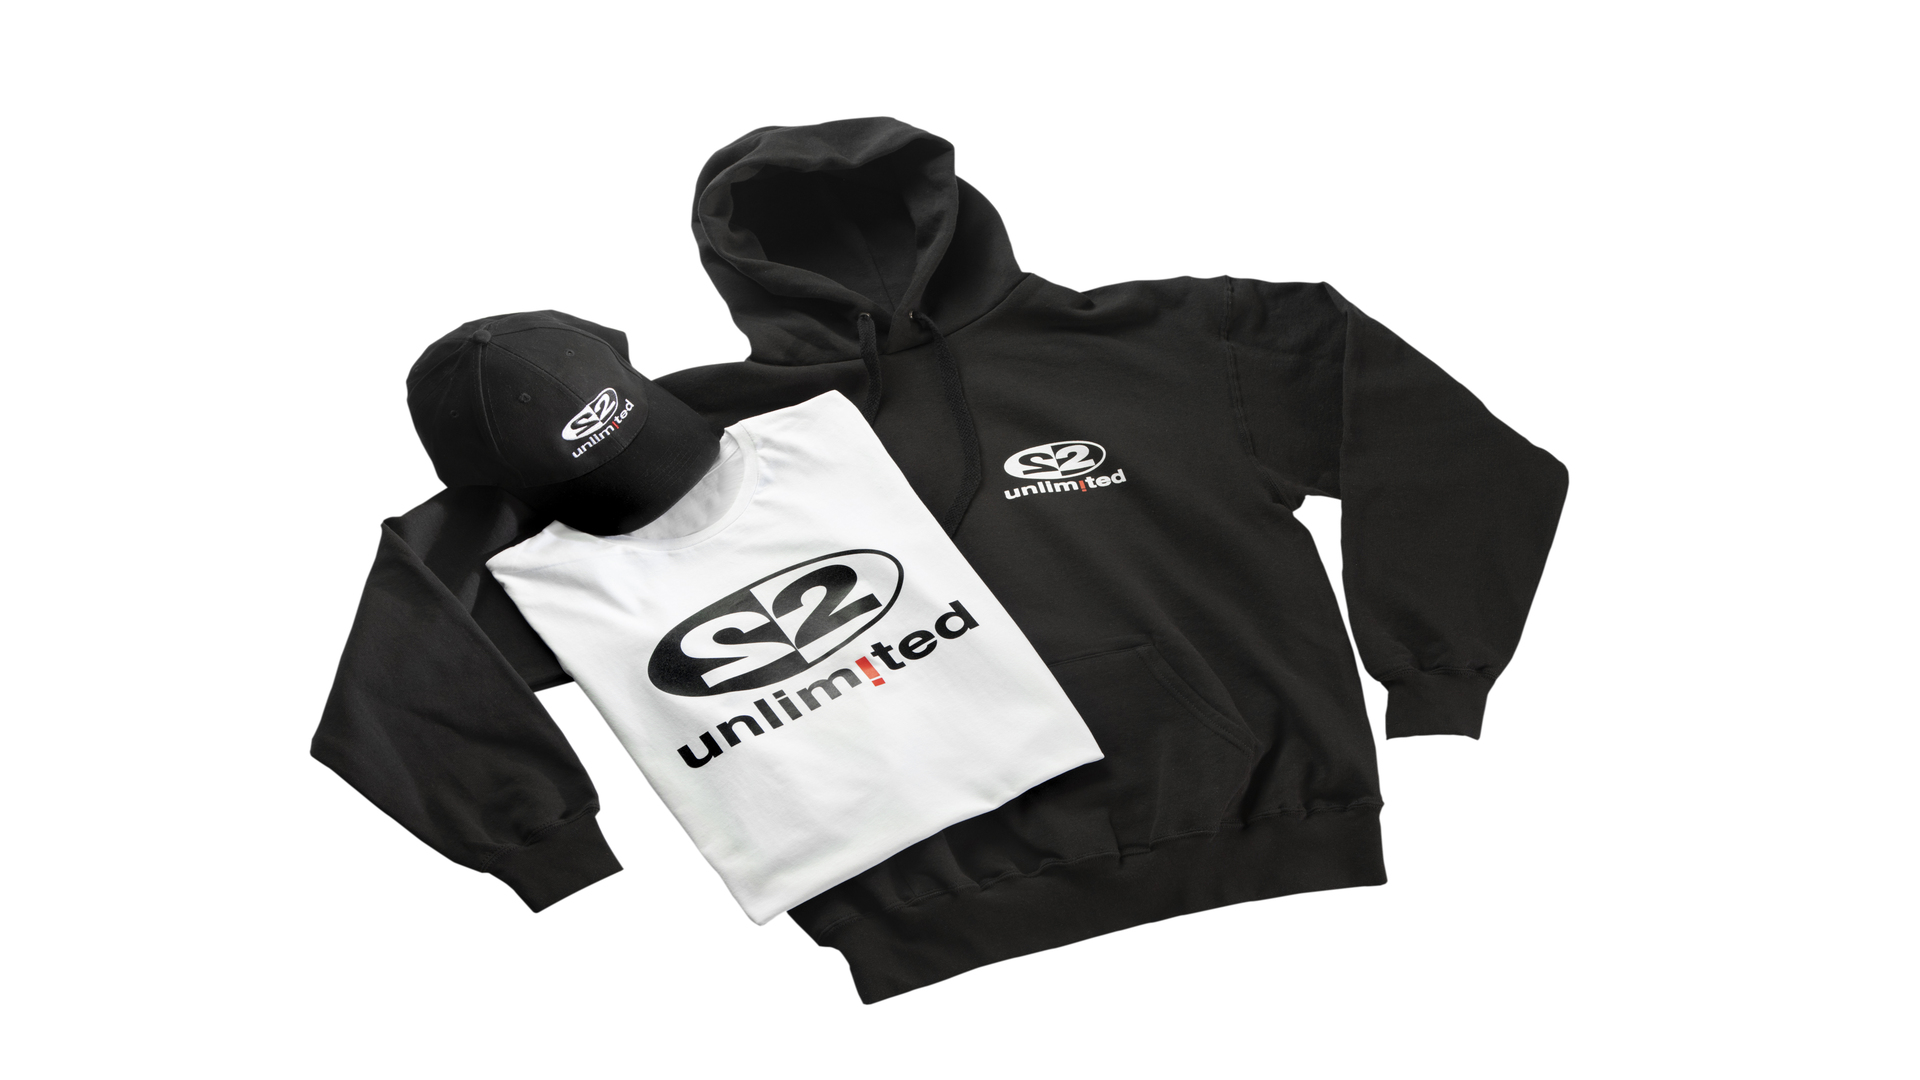 Introducing the all-new online merchandise webshop of 2 Unlimited